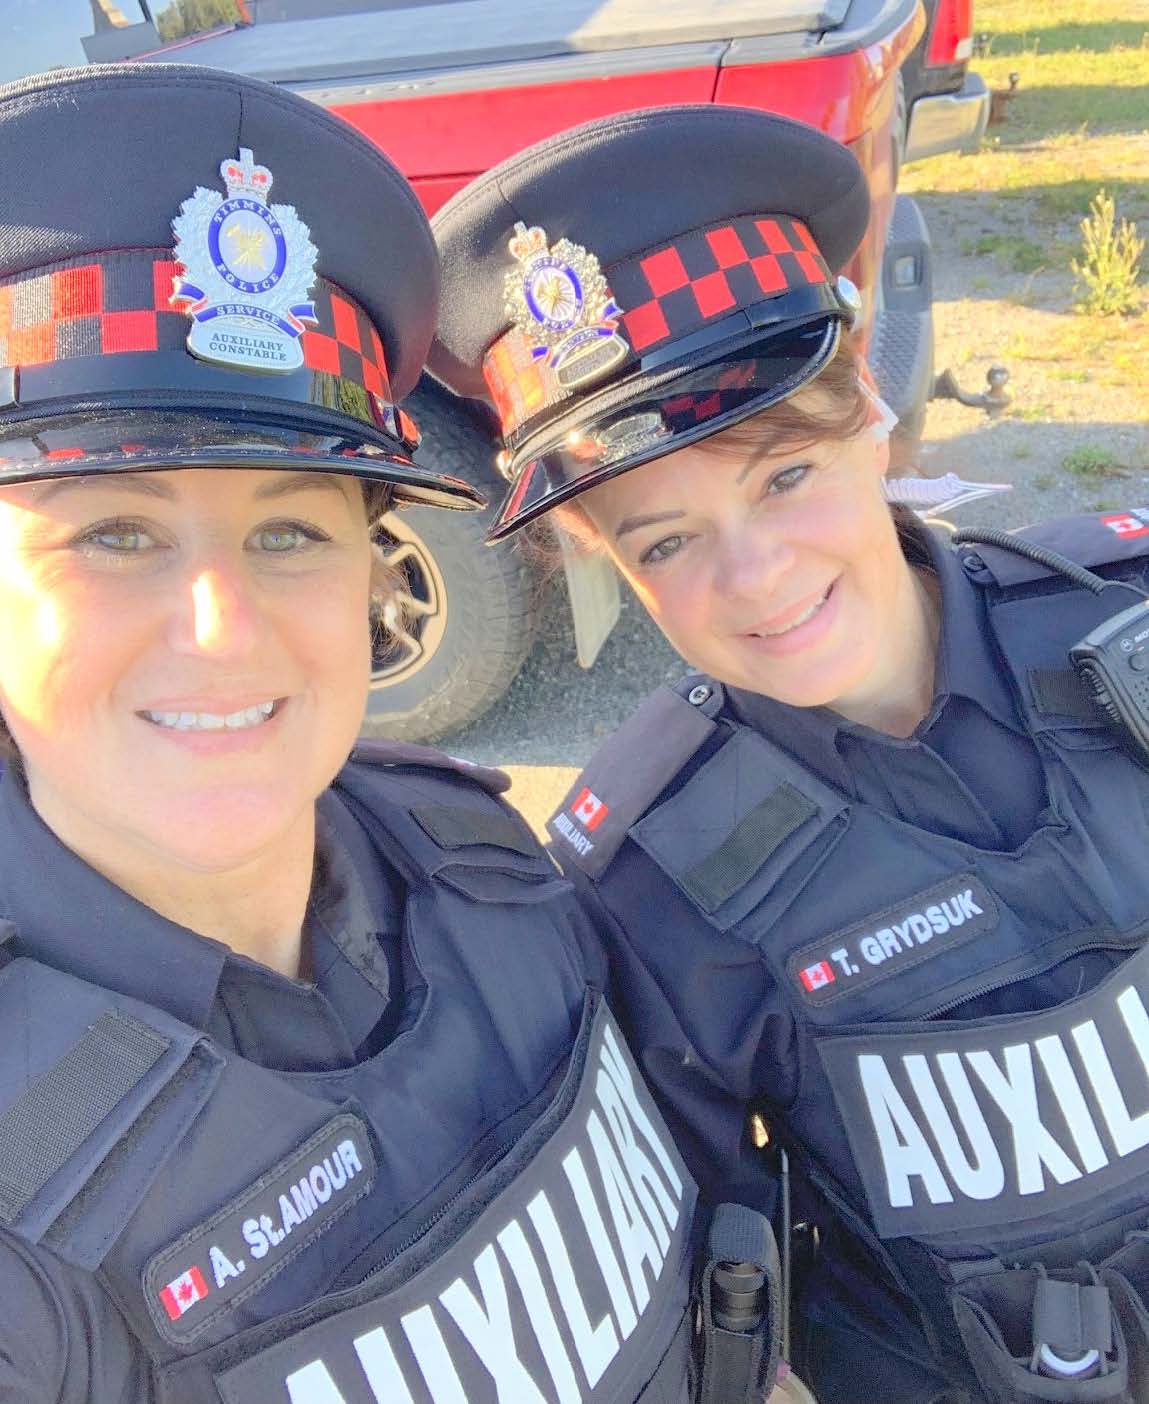 Two women from the Timmins Police posing for a photo in their uniforms.